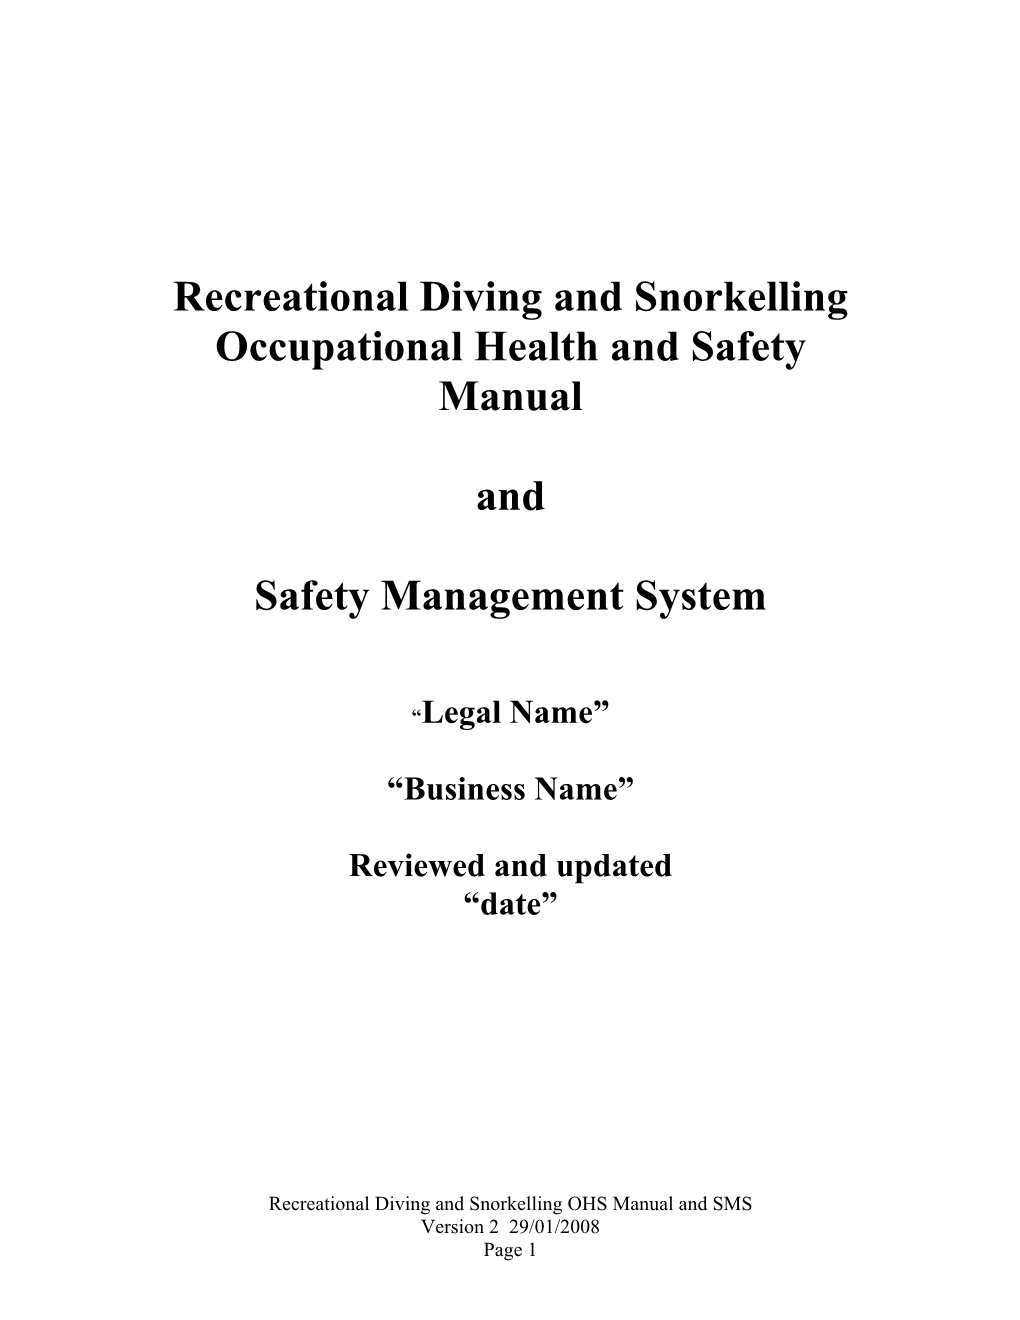 Recreational Diving and Snorkelling Occupational Health and Safety Manual and Safety Management System